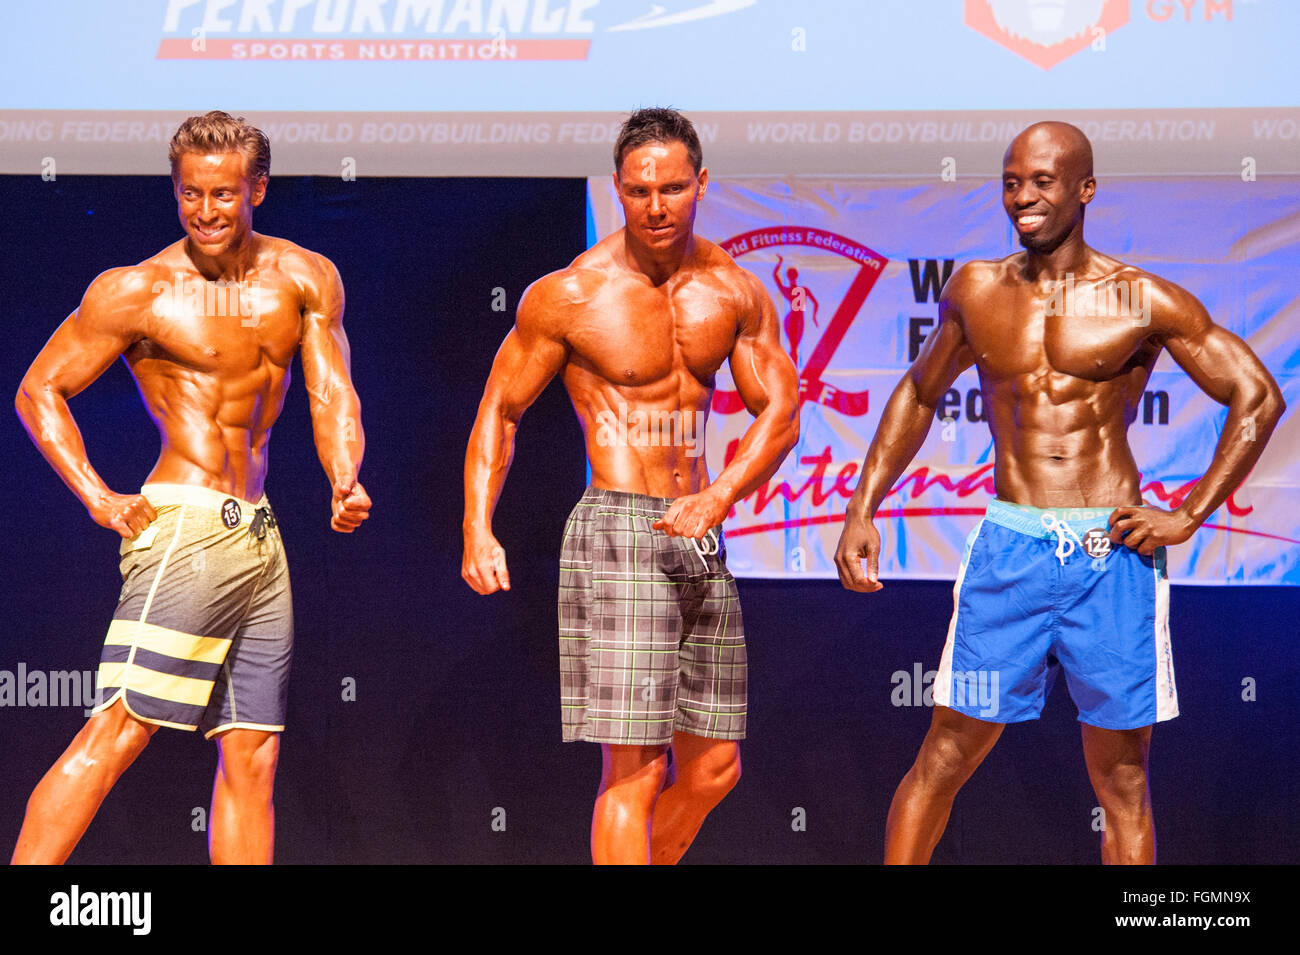 MAASTRICHT, THE NETHERLANDS - OCTOBER 25, 2015: Male physique model John Black and other competitiors show their best front pose Stock Photo